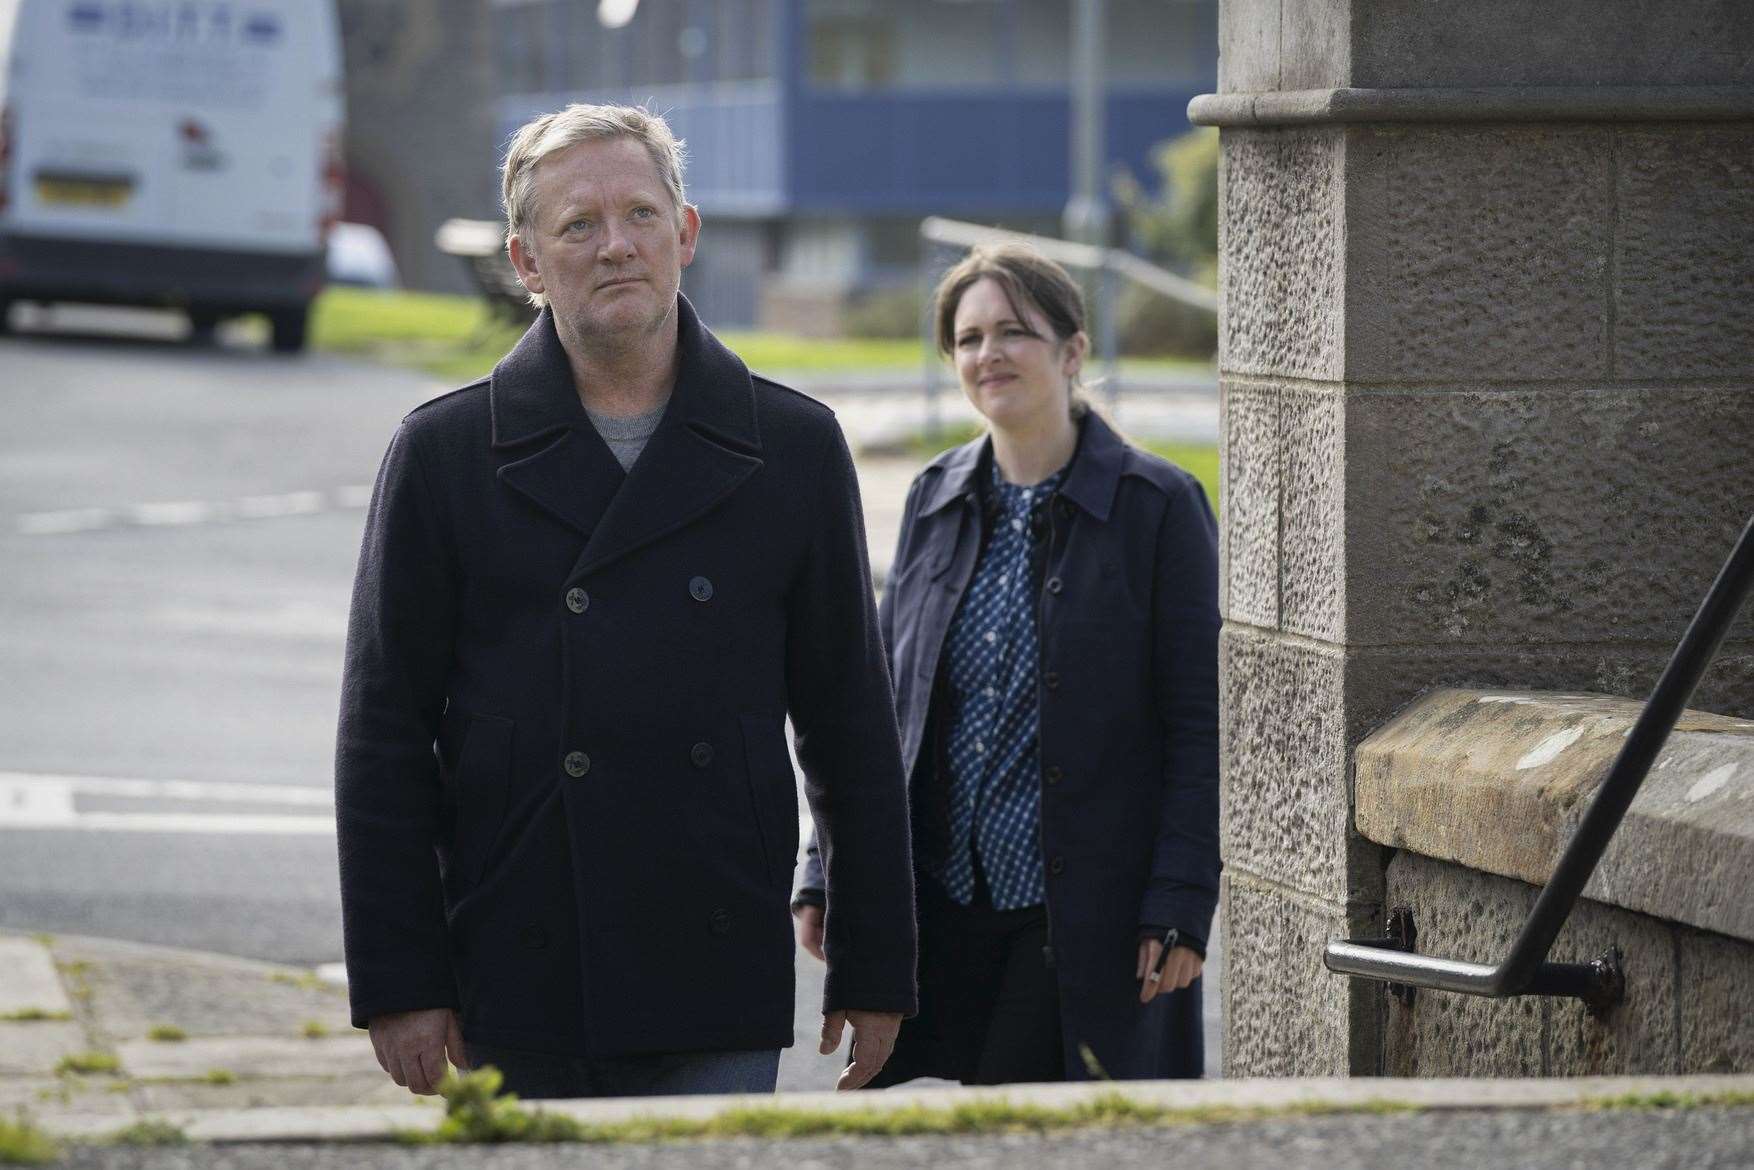 Shetland sees the return for the final time for DI Jimmy Perez (DOUGLAS HENSHALL);DS Alison ‘Tosh’ McIntosh (ALISON O’DONNELL)